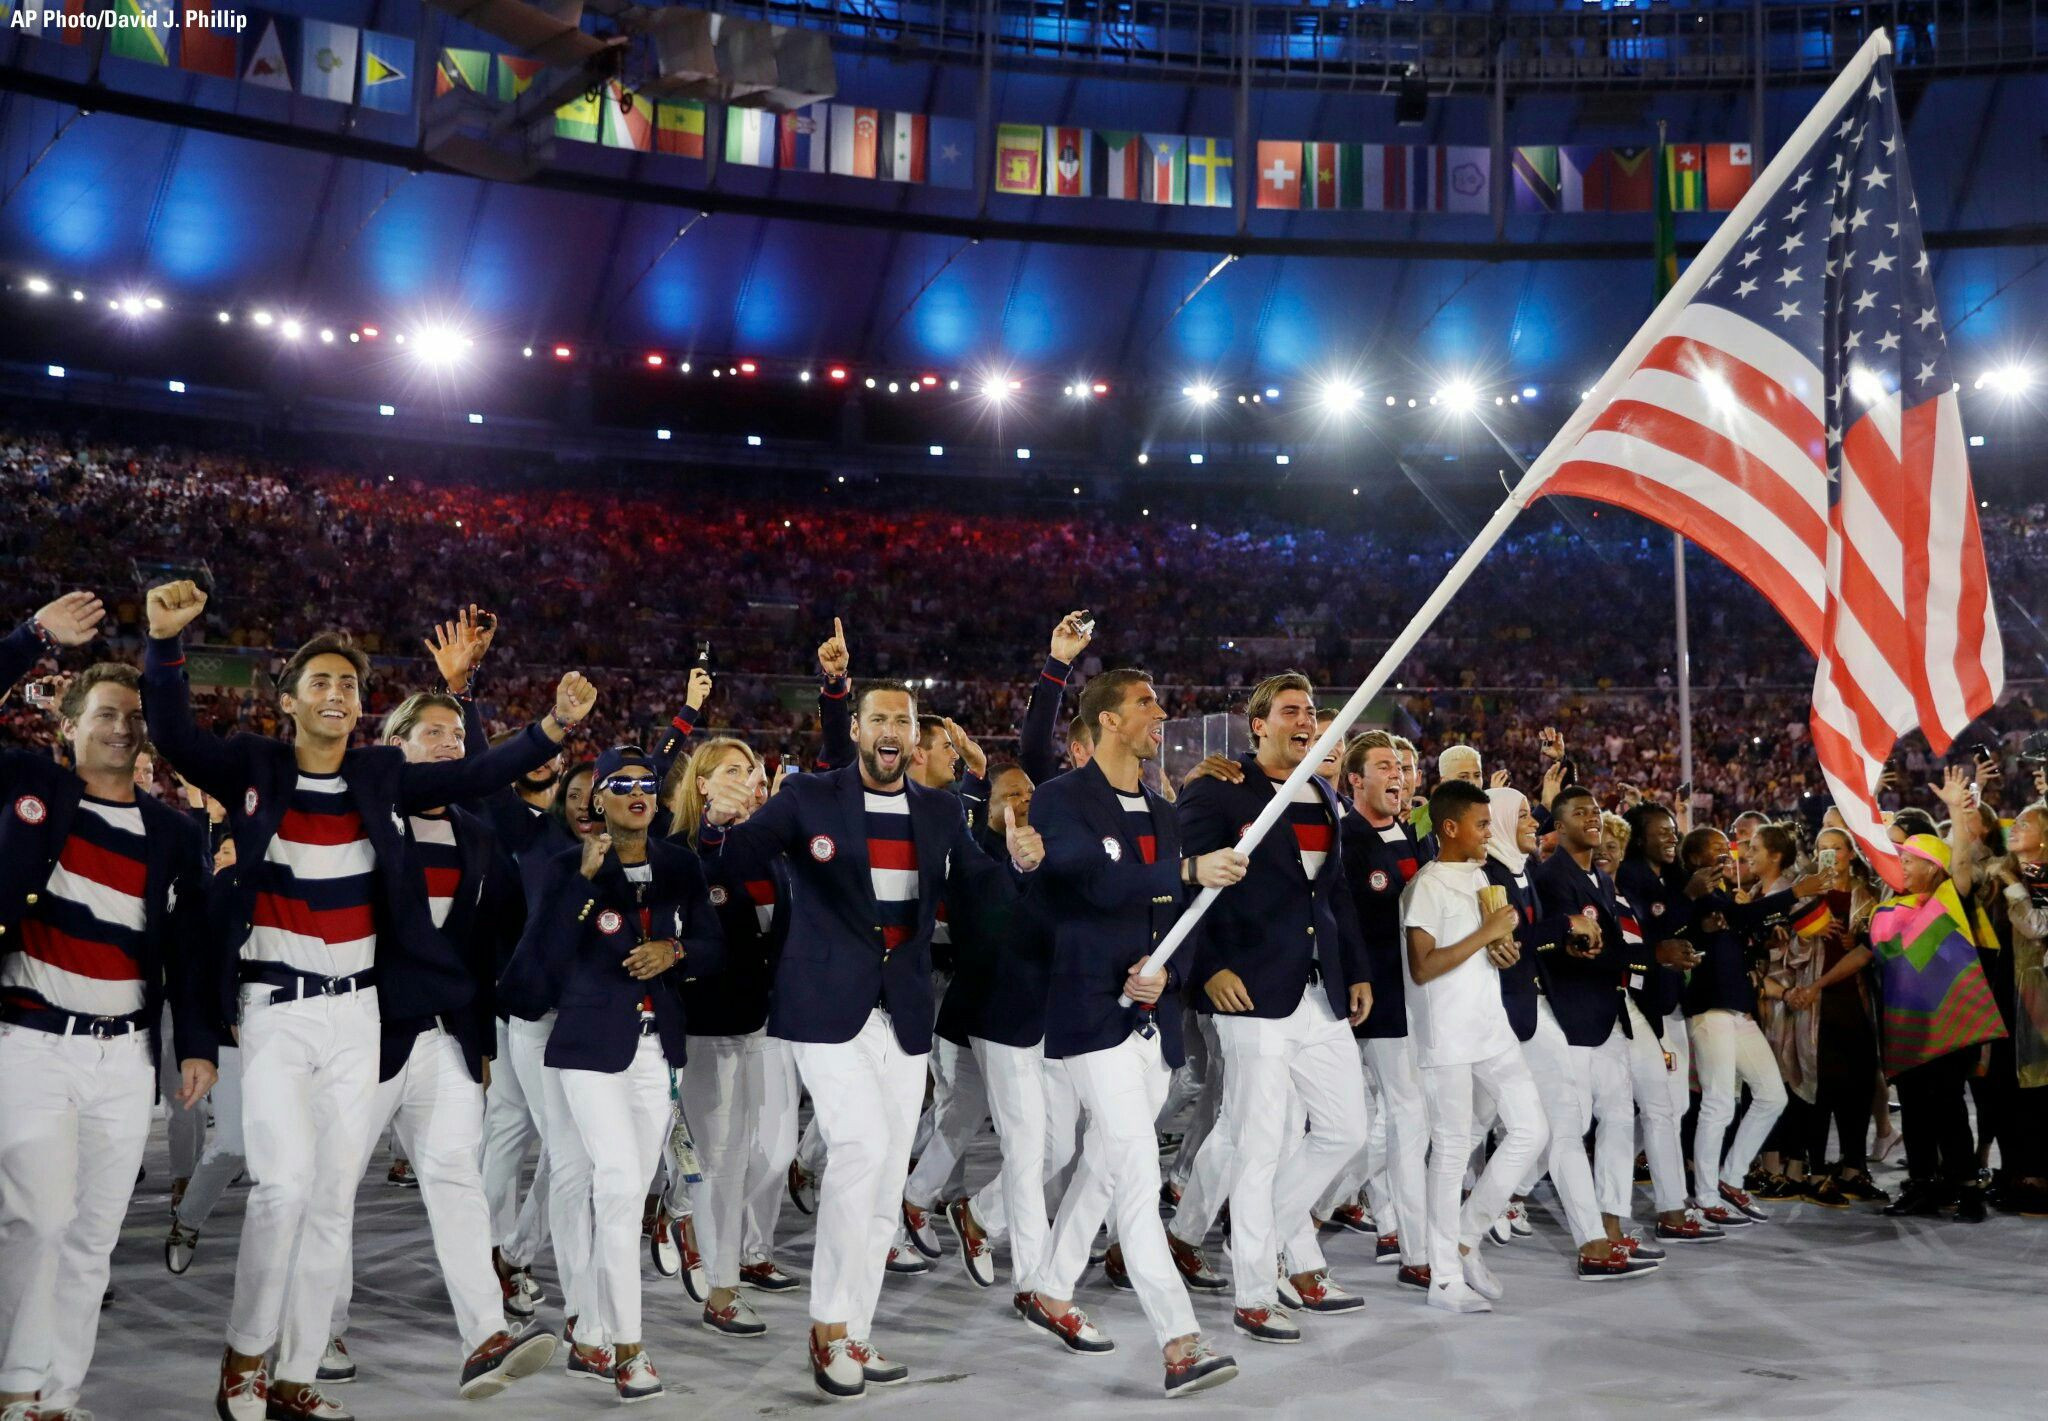 U.S. Olympic and Paralympic Properties, a joint venture between Los Angeles 2028 and the USOPC, will take over the marketing, sponsorship and licensed merchandise programmes for Team USA from 2021 ©Getty Images